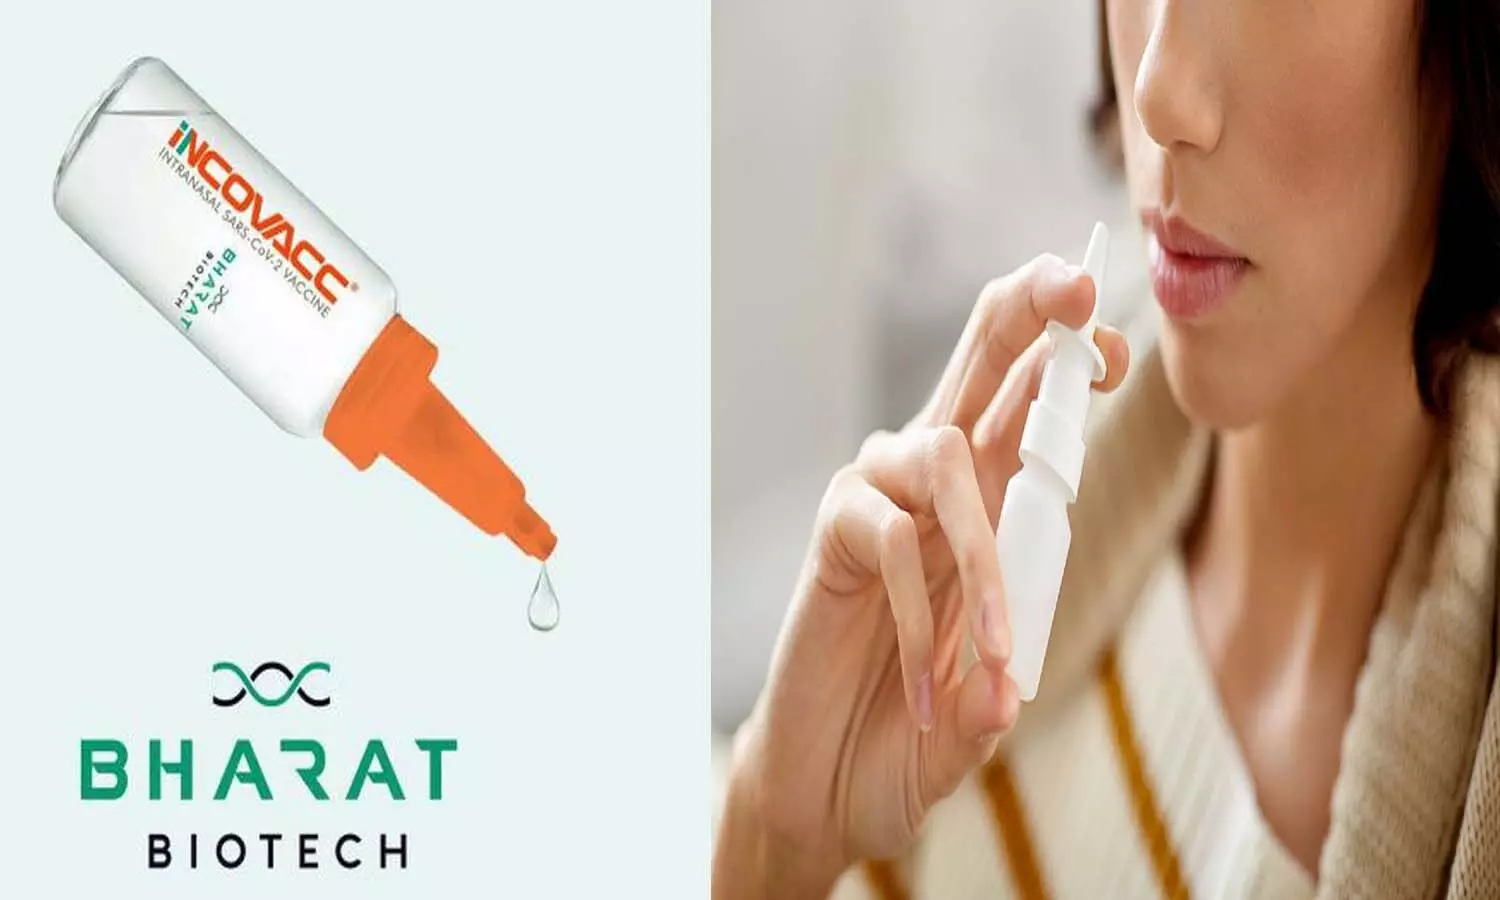 Know here the price of Bharat Biotechs nasal vaccine, how it works